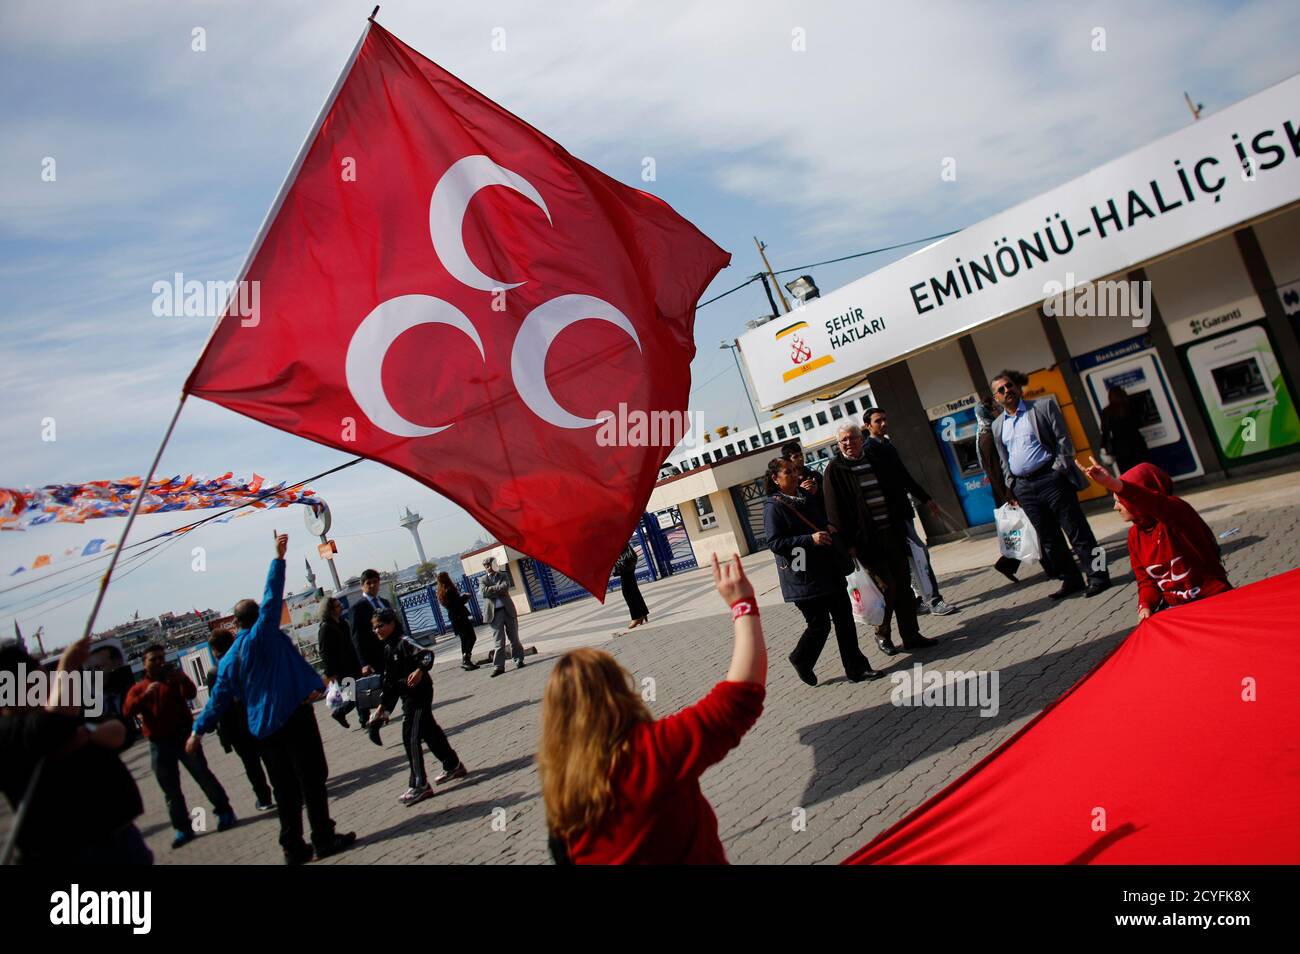 Members of Nationalist Movement Party (MHP) wave a party flag during an  election campaign in Istanbul March 27, 2014. To the adulation of the  cheering crowds at his election rallies, Prime Minister